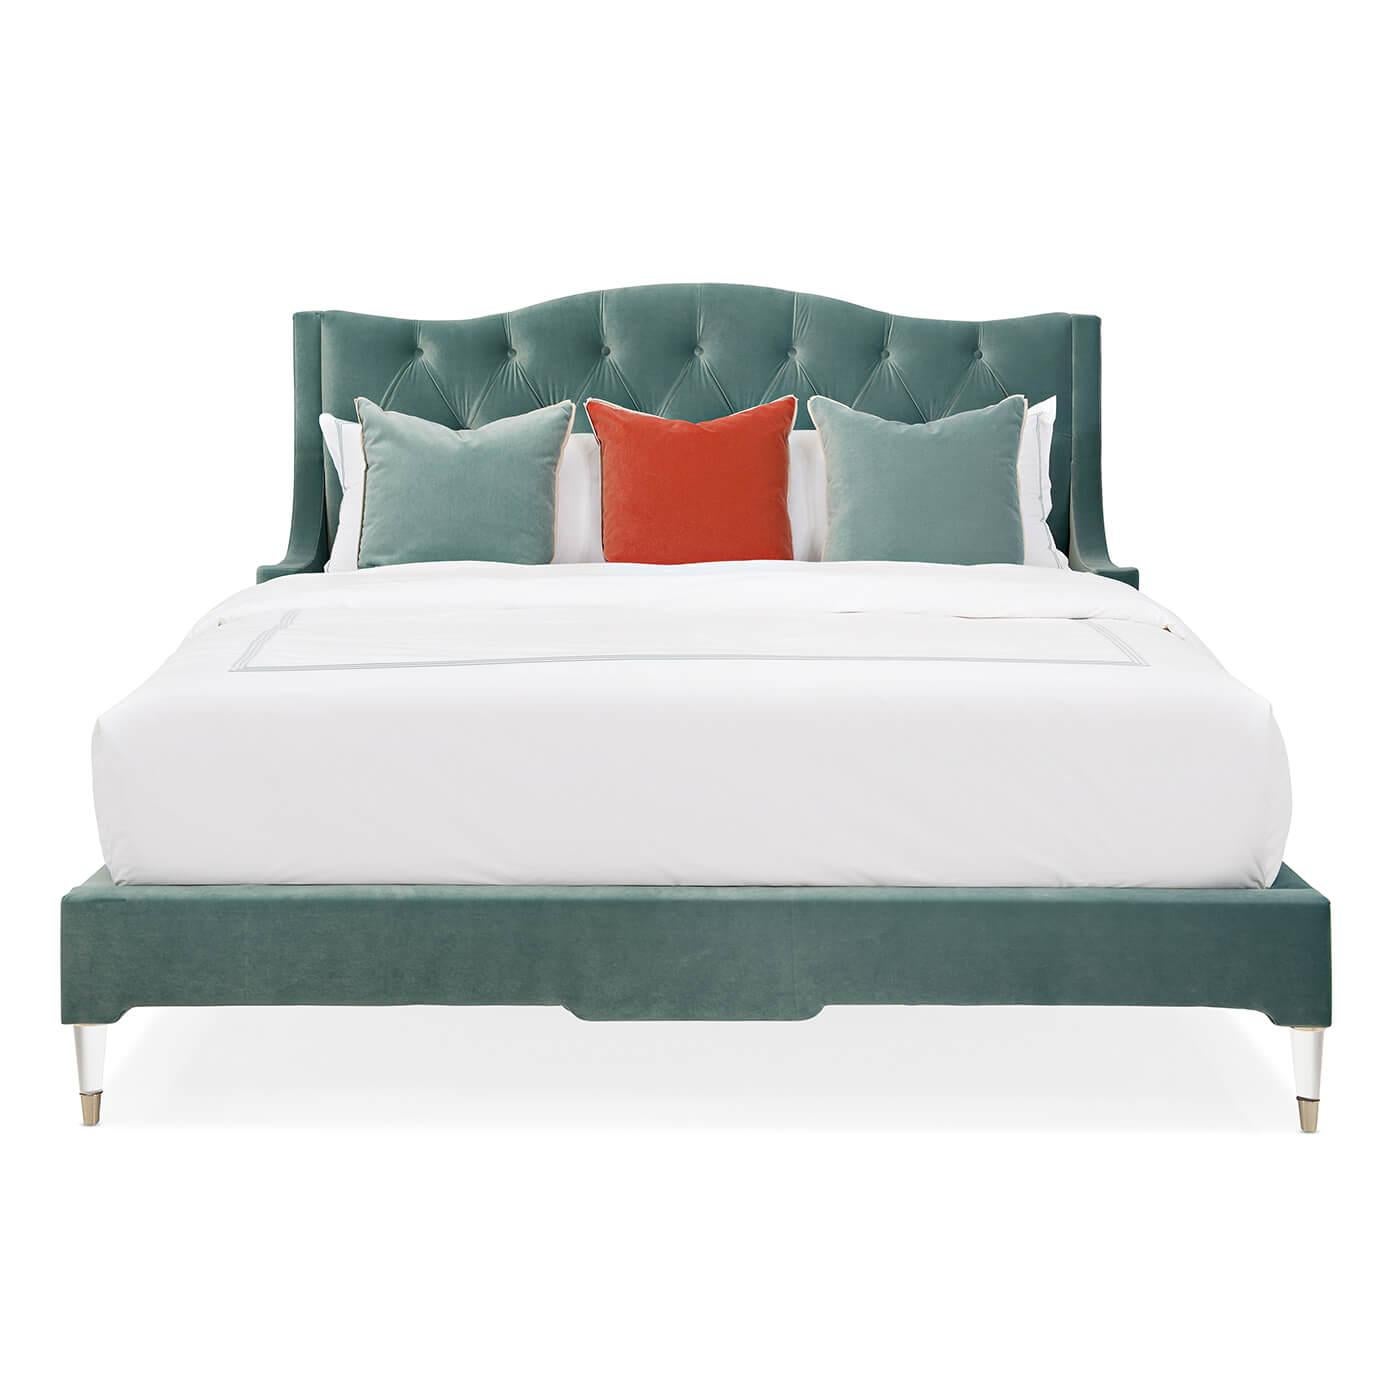 A velvet tufted upholstered king bed with a tufted diamond-pattern headboard. This bed is upholstered in a sea-inspired fabric. The sides of the headboard wrap around with a design inspired by an English armchair. It has wooden legs finished in